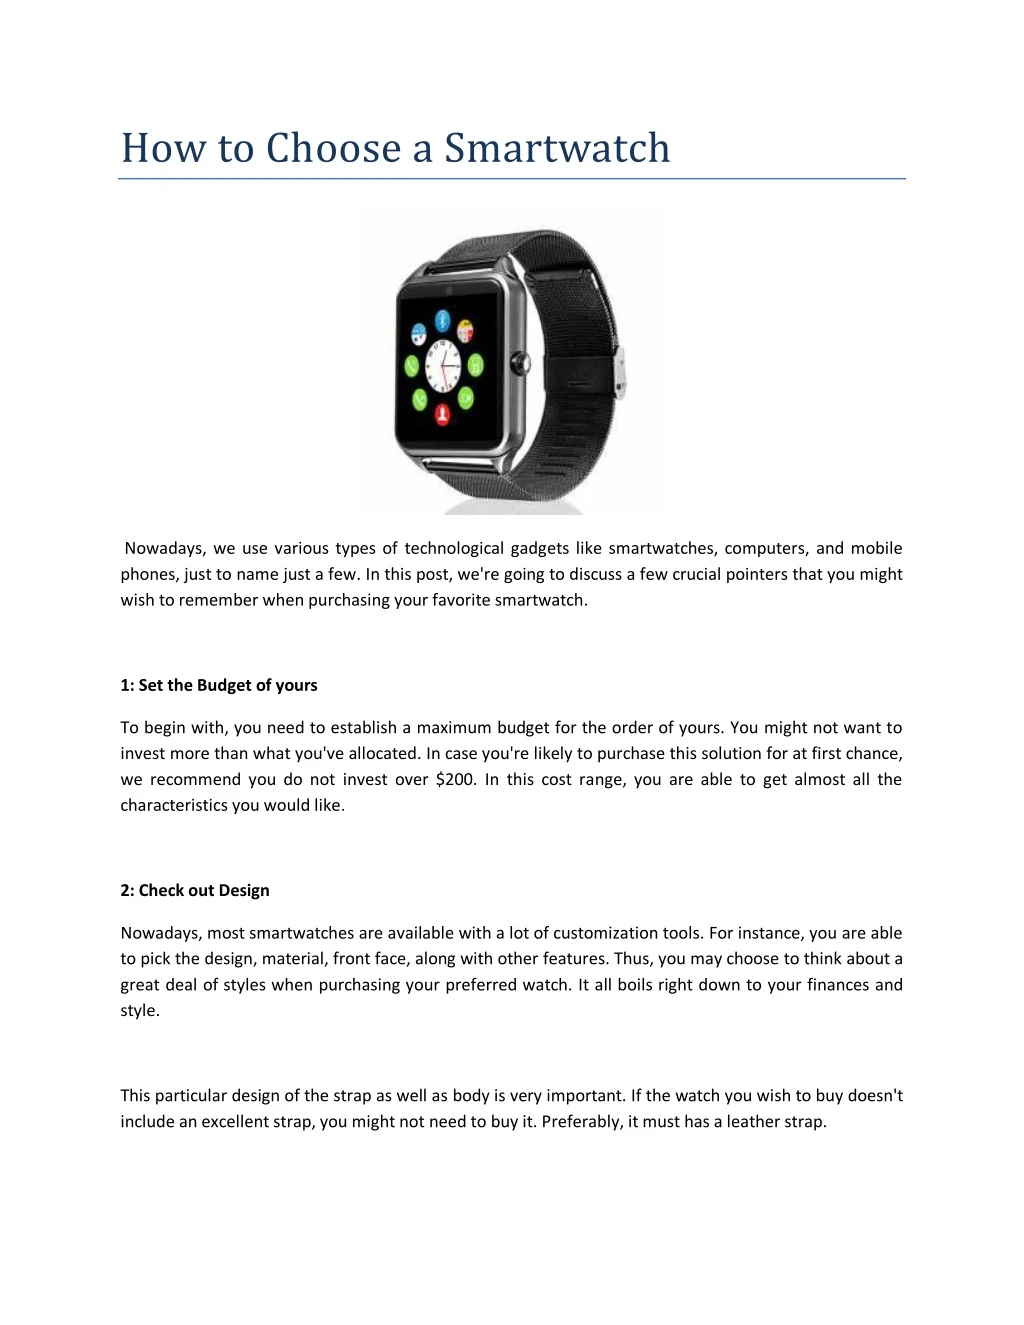 how to choose a smartwatch